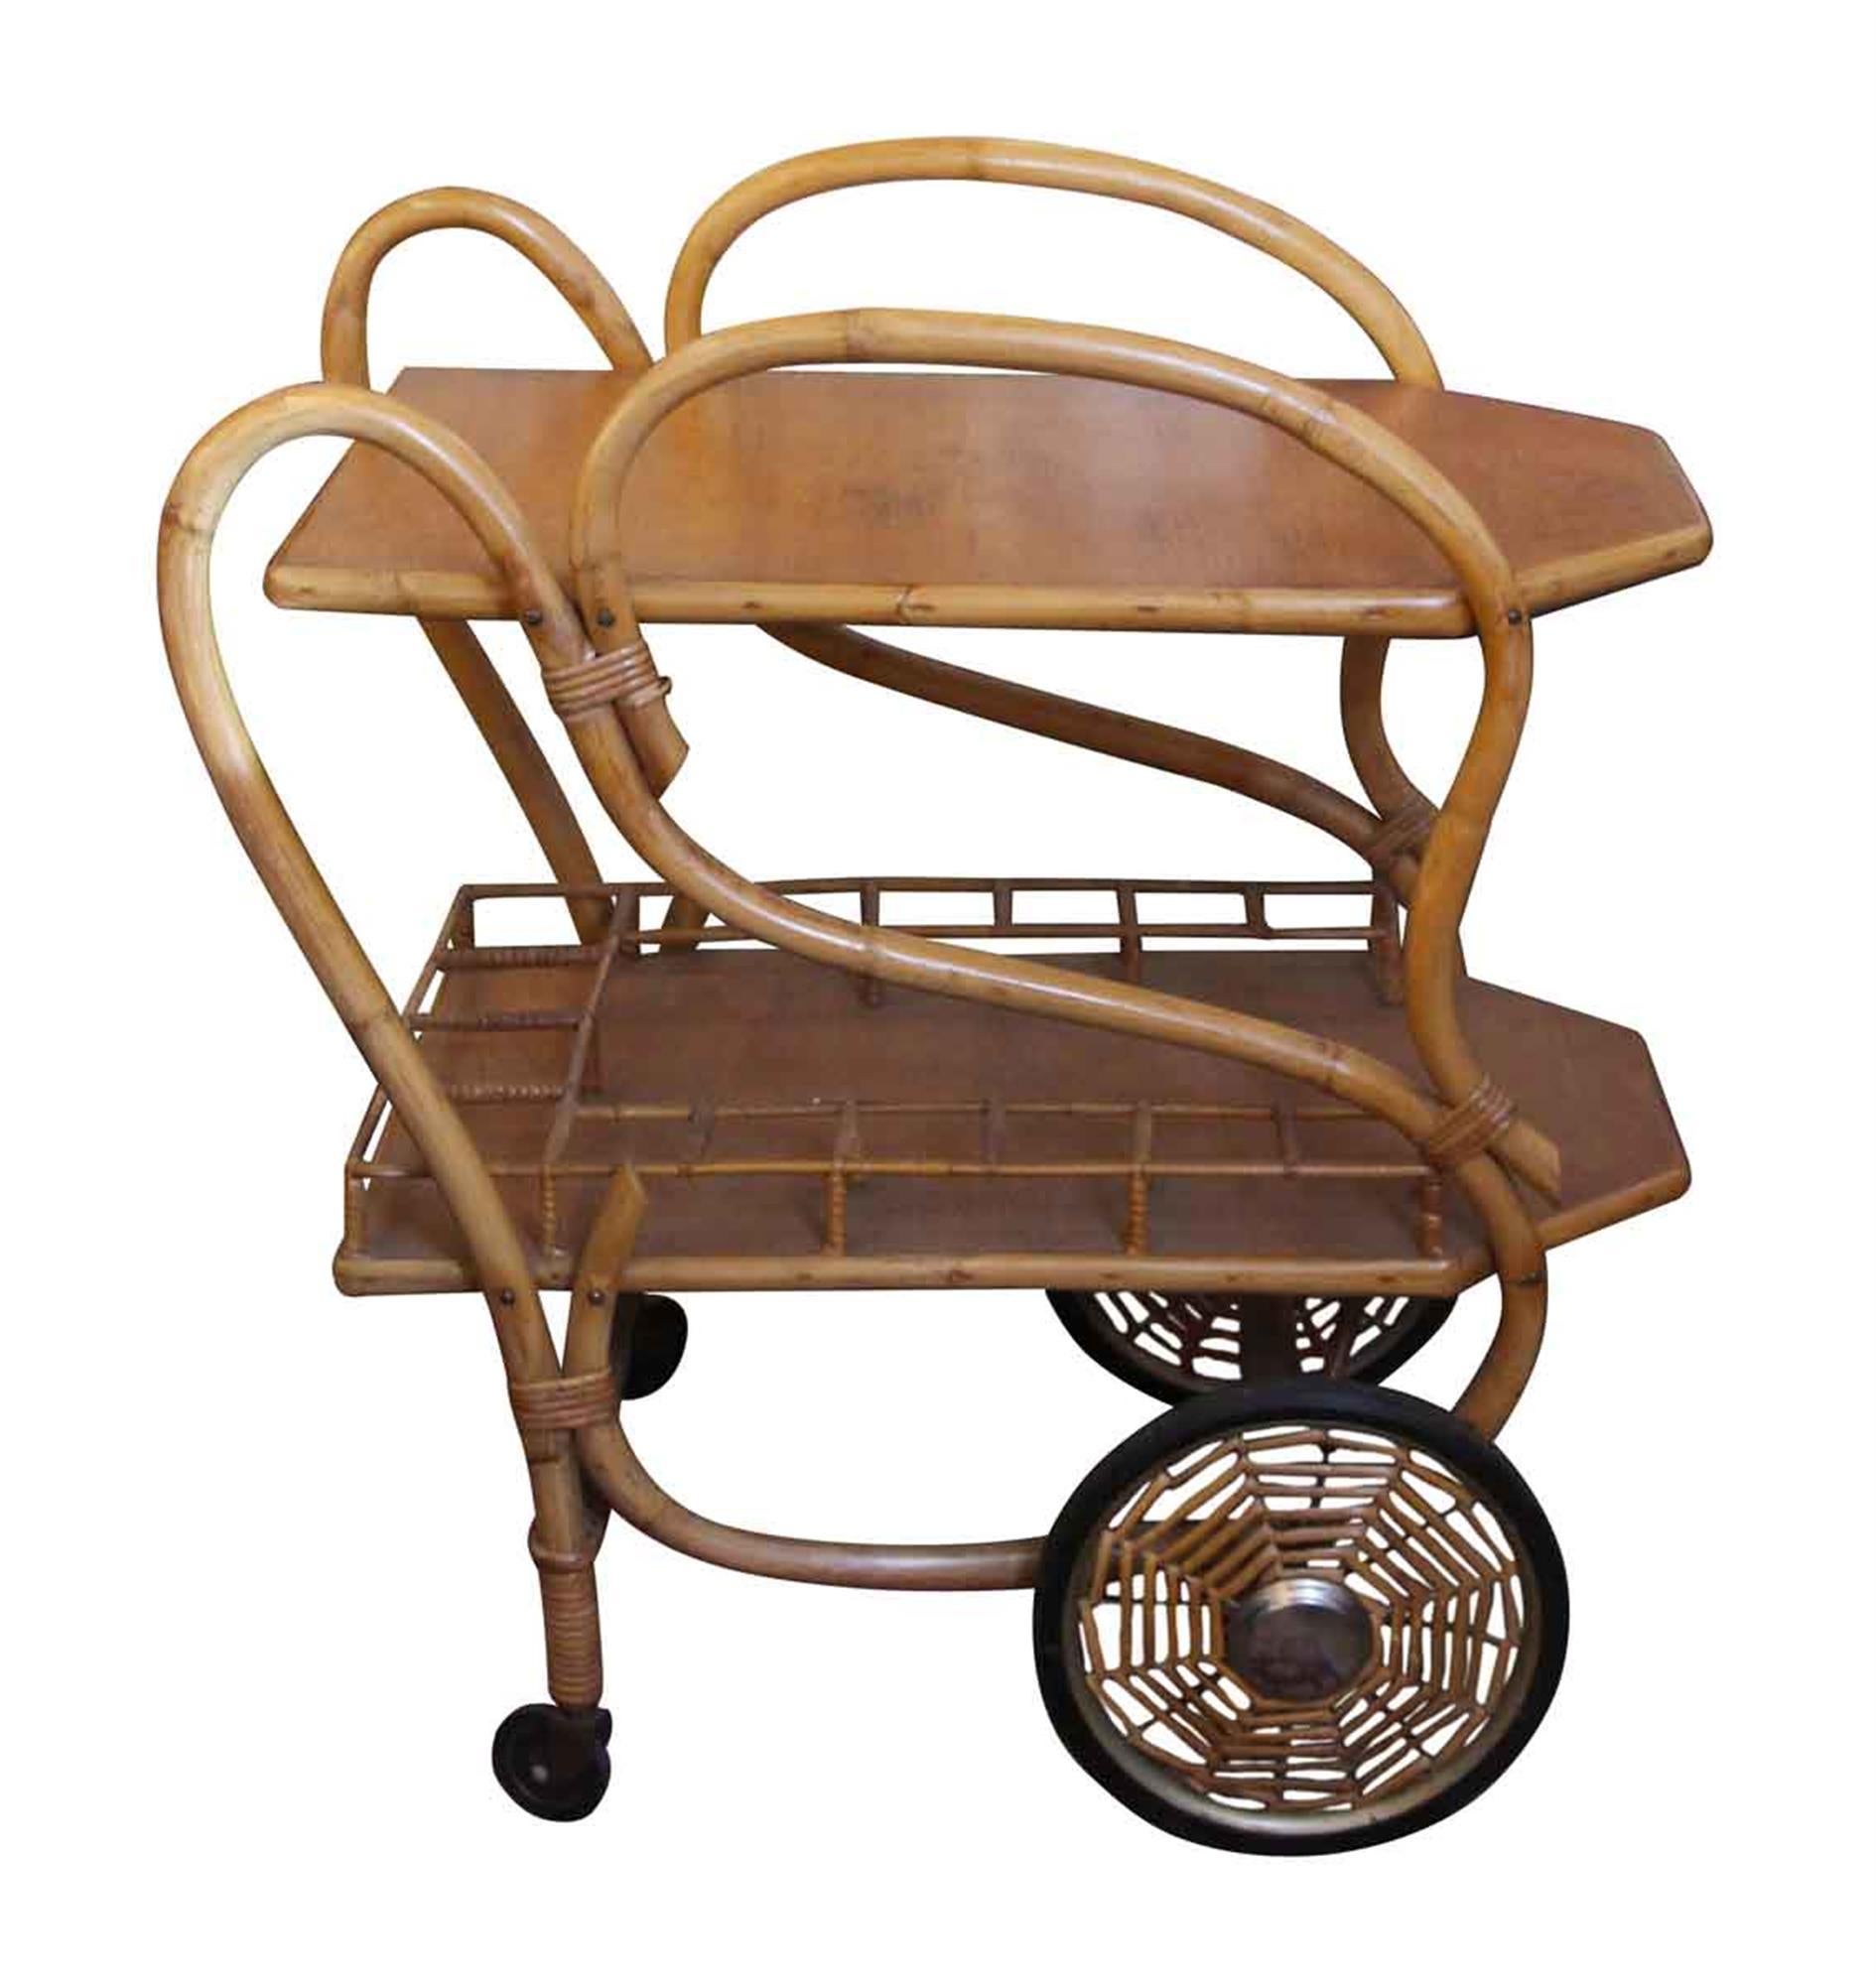 This rare 1951 Mid-Century Modern bamboo tea cart is labeled The Halle Bros. Company and dated 1951. It is in very good condition. The spider web wheels make it truly unique! This can be seen at our 2420 Broadway location on the upper west side in